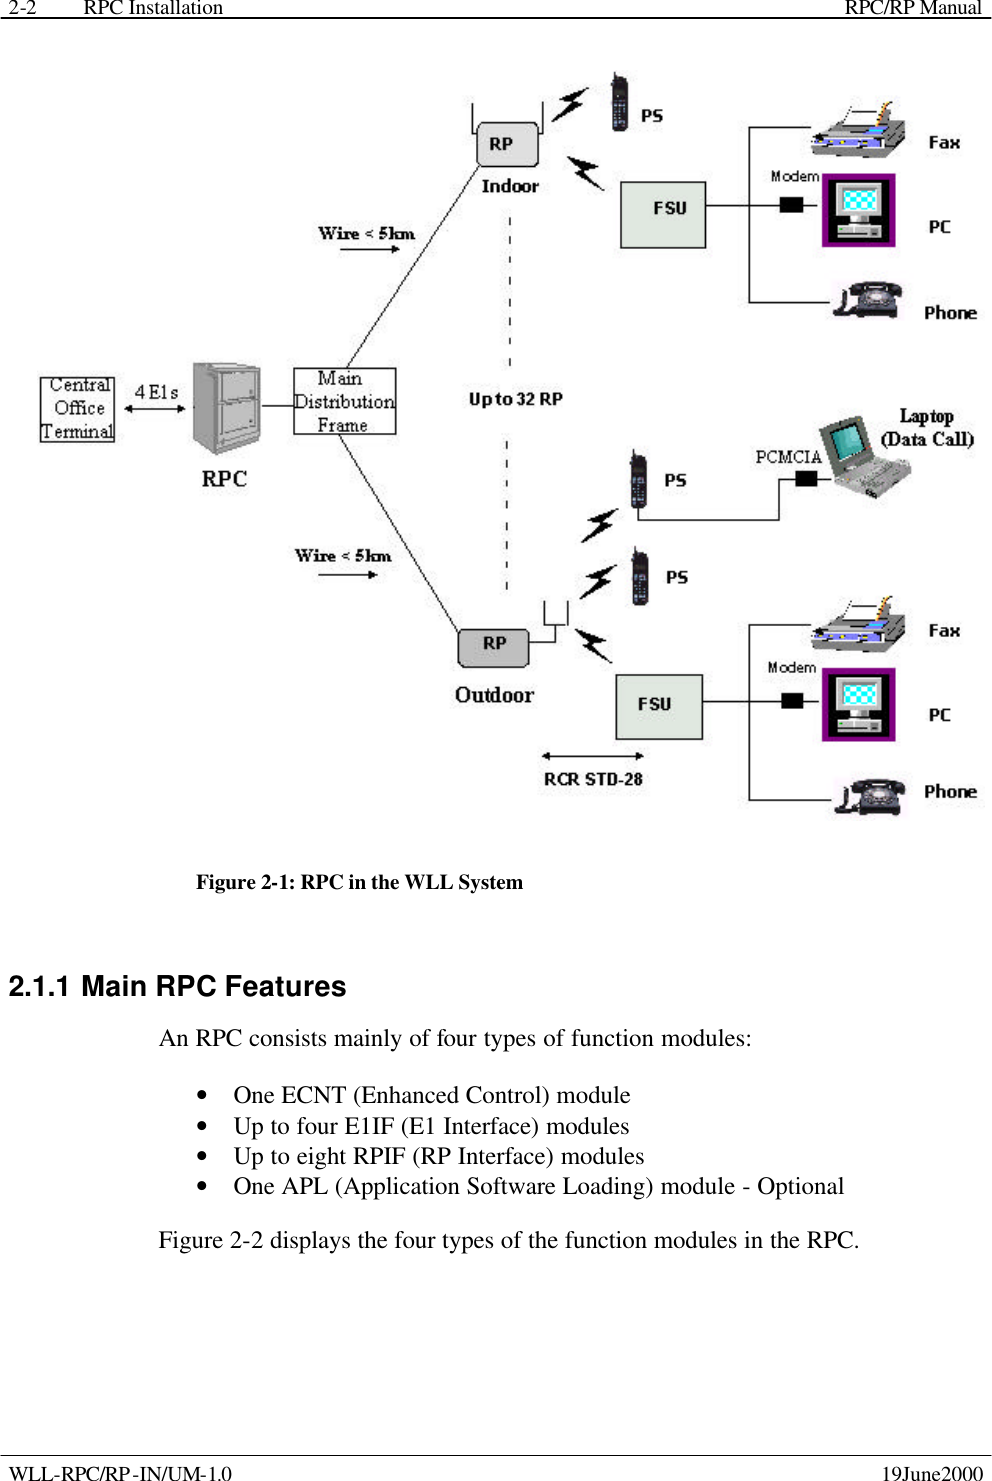 RPC Installation    RPC/RP Manual WLL-RPC/RP-IN/UM-1.0    19June2000 2-2 Figure 2-1: RPC in the WLL System 2.1.1 Main RPC Features An RPC consists mainly of four types of function modules: • One ECNT (Enhanced Control) module • Up to four E1IF (E1 Interface) modules • Up to eight RPIF (RP Interface) modules • One APL (Application Software Loading) module - Optional Figure 2-2 displays the four types of the function modules in the RPC. 